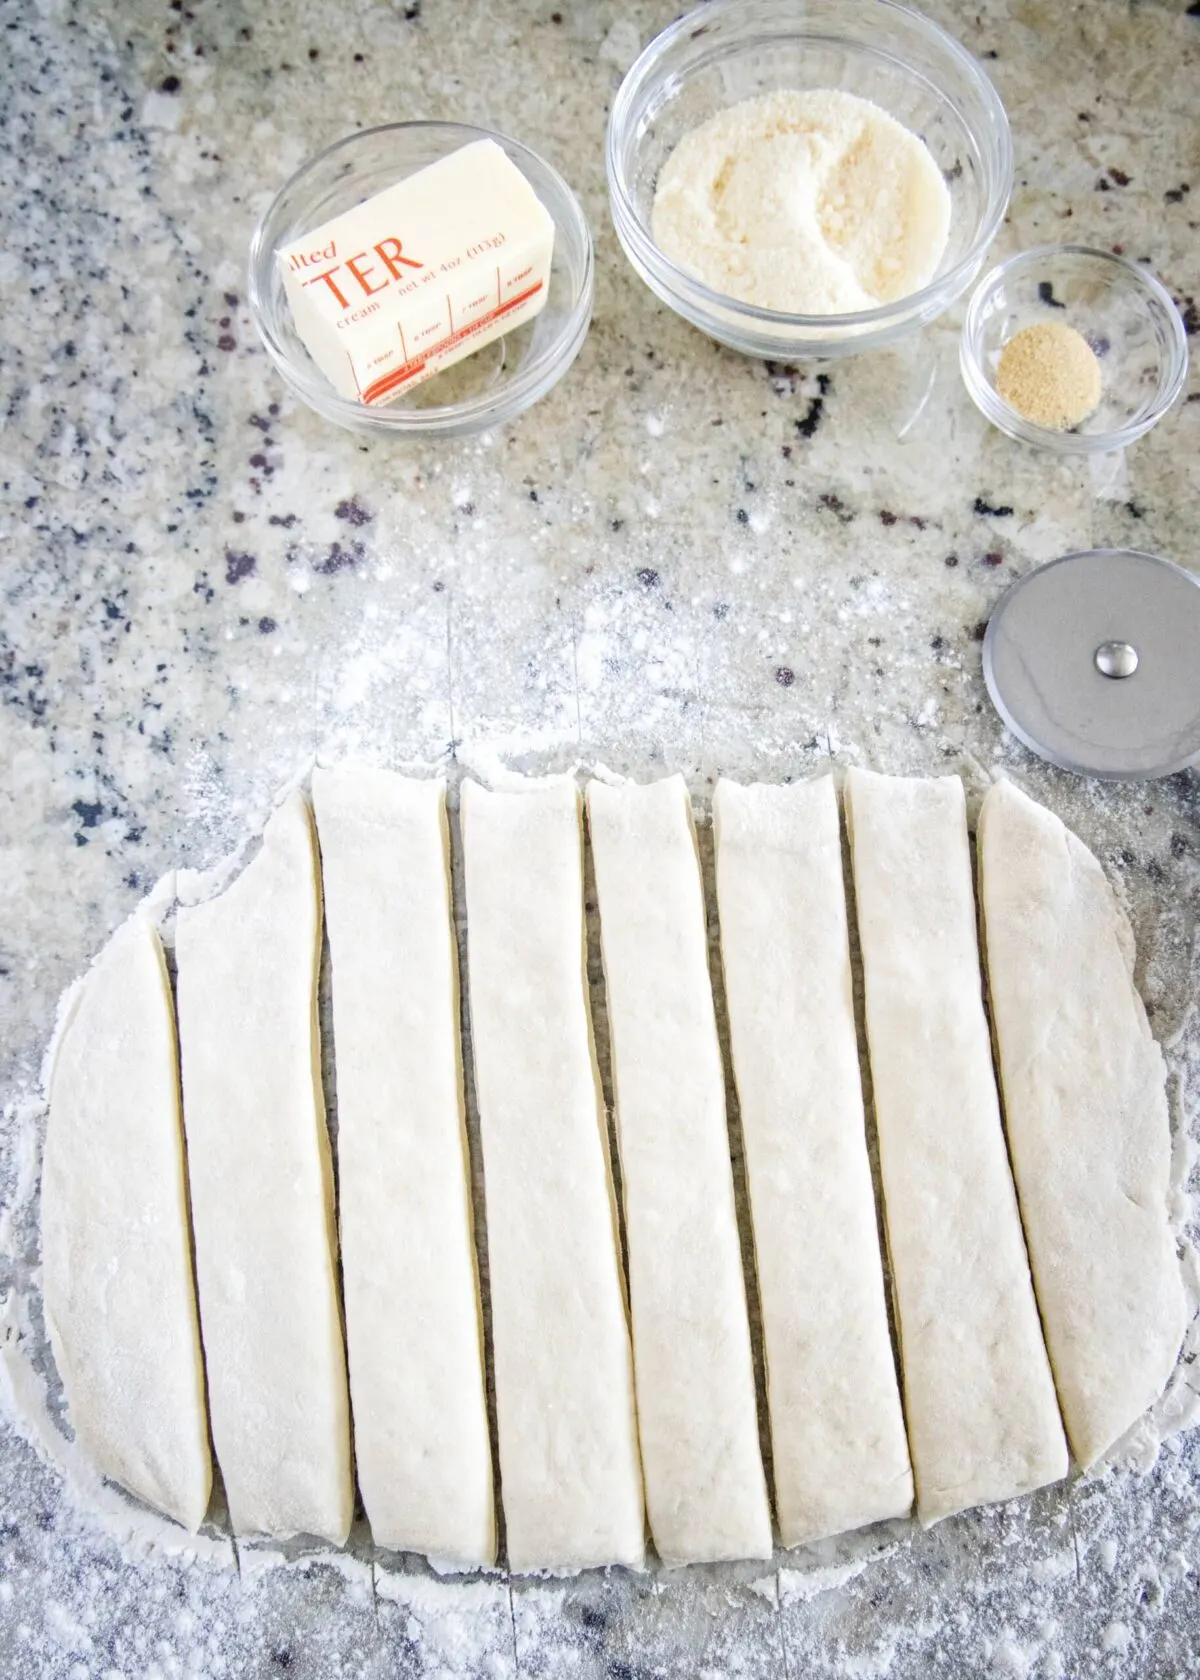 Pizza dough cut into eight strips, next to a pizza cutter, a bowl of parmesan cheese, a bowl of garlic powder, and half a stick of butter